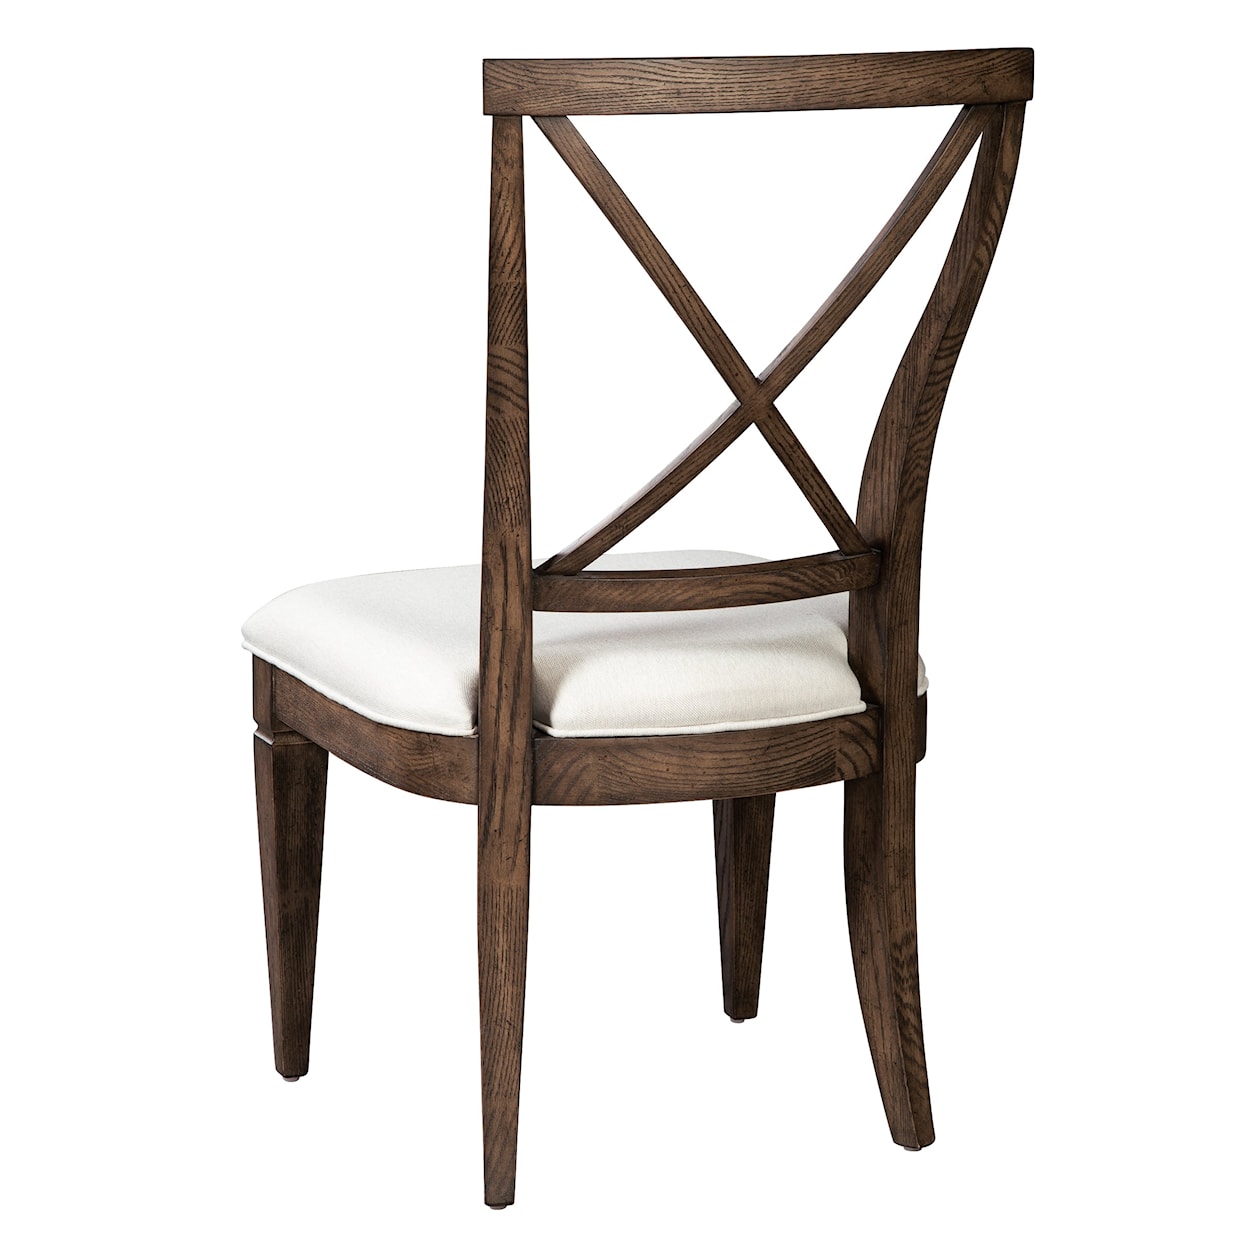 Hekman Wexford Dining Side Chair